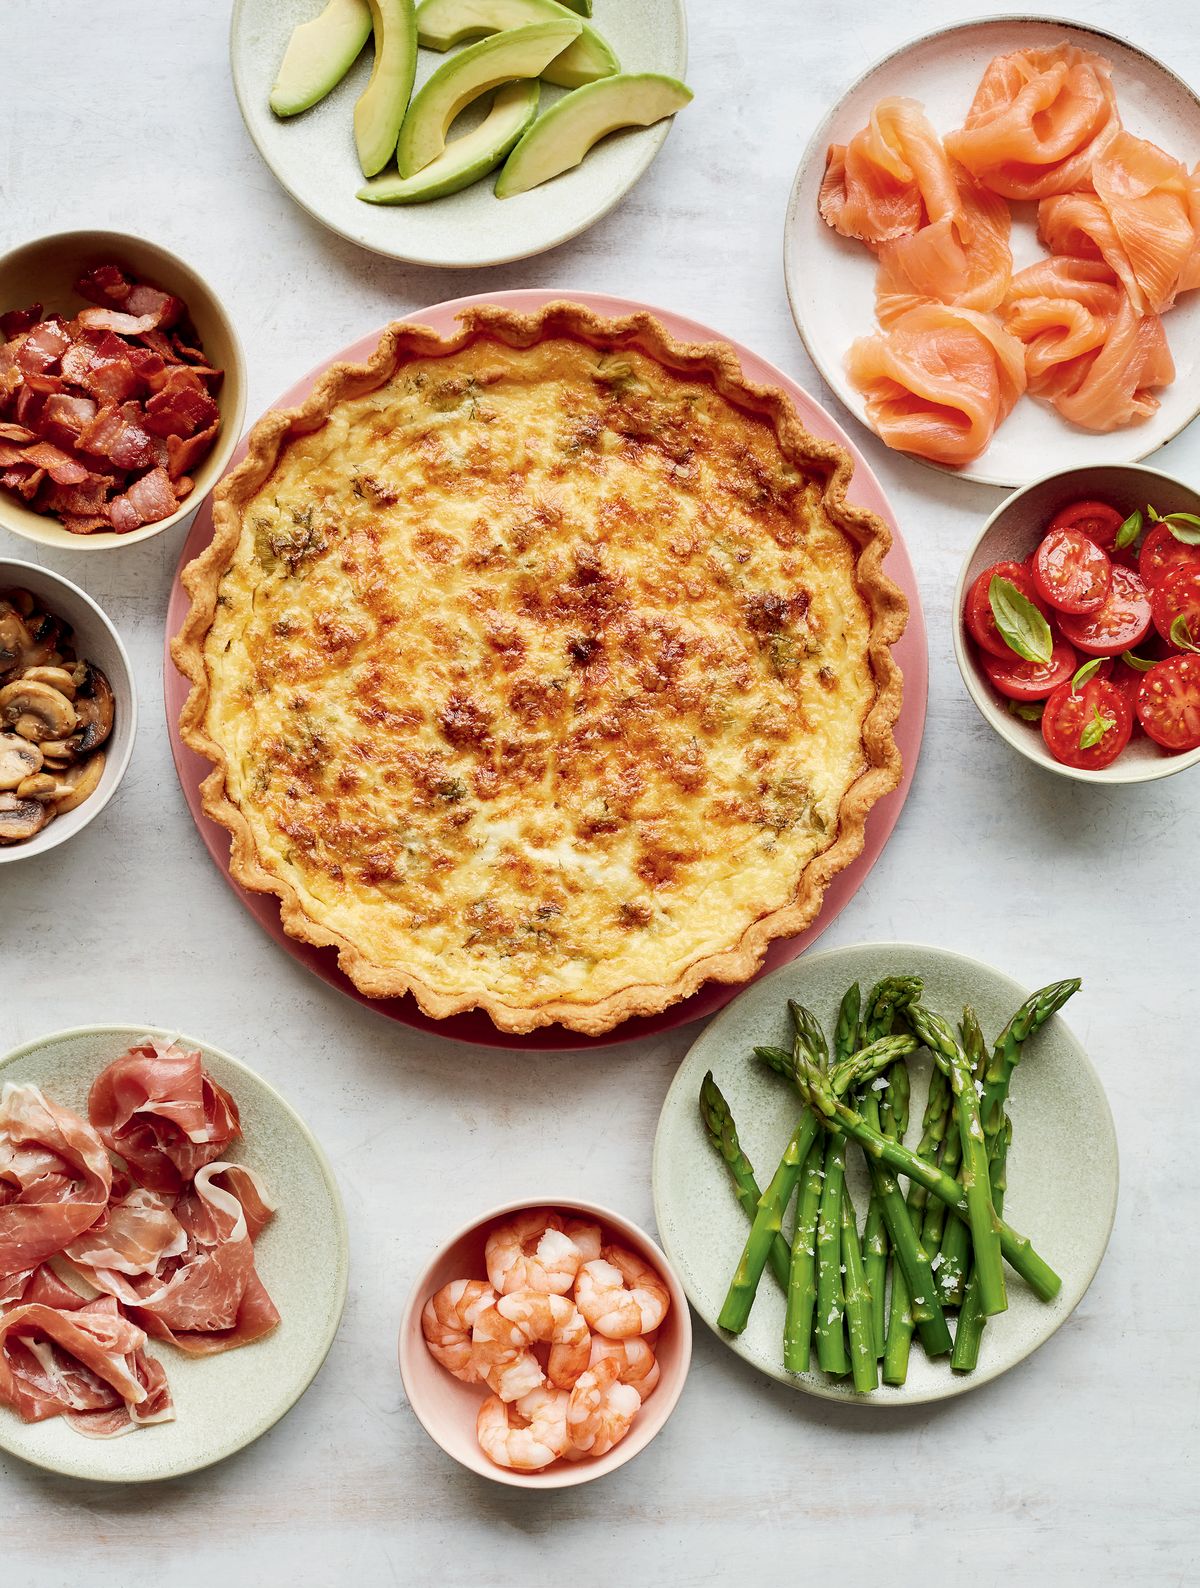 Mary Berry’s Leek & Dill Quiche with a Choice of Toppings